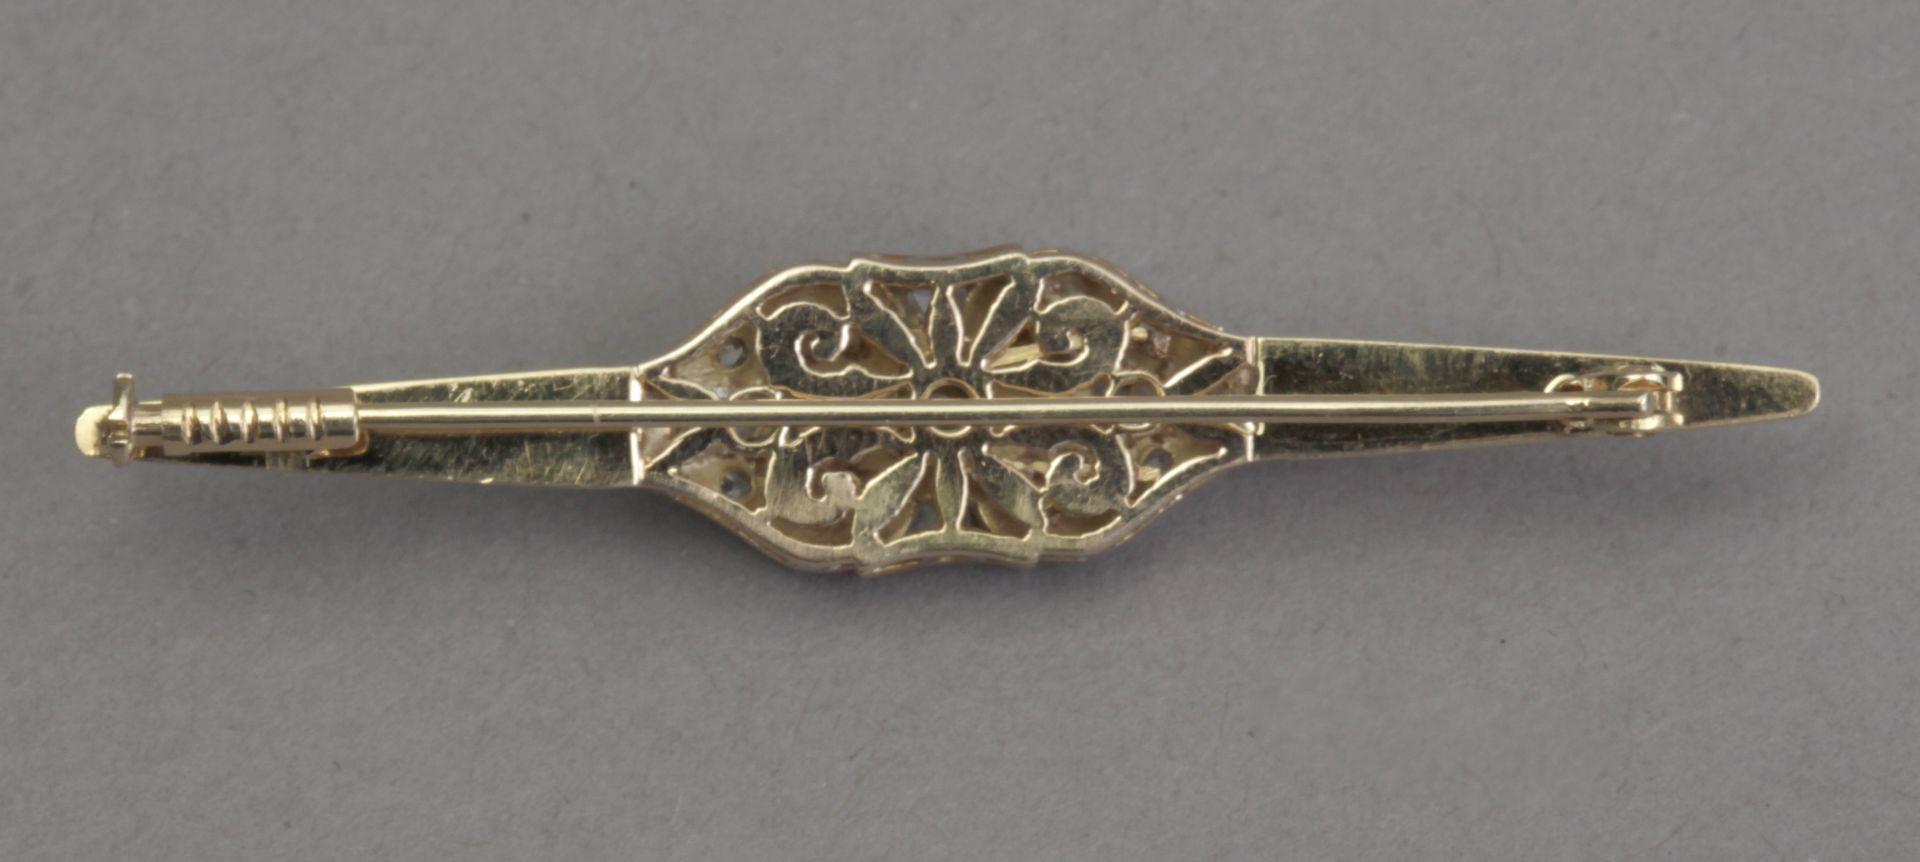 A 20th century Belle Époque style diamond tie pin with an 18k. gold setting - Image 2 of 3